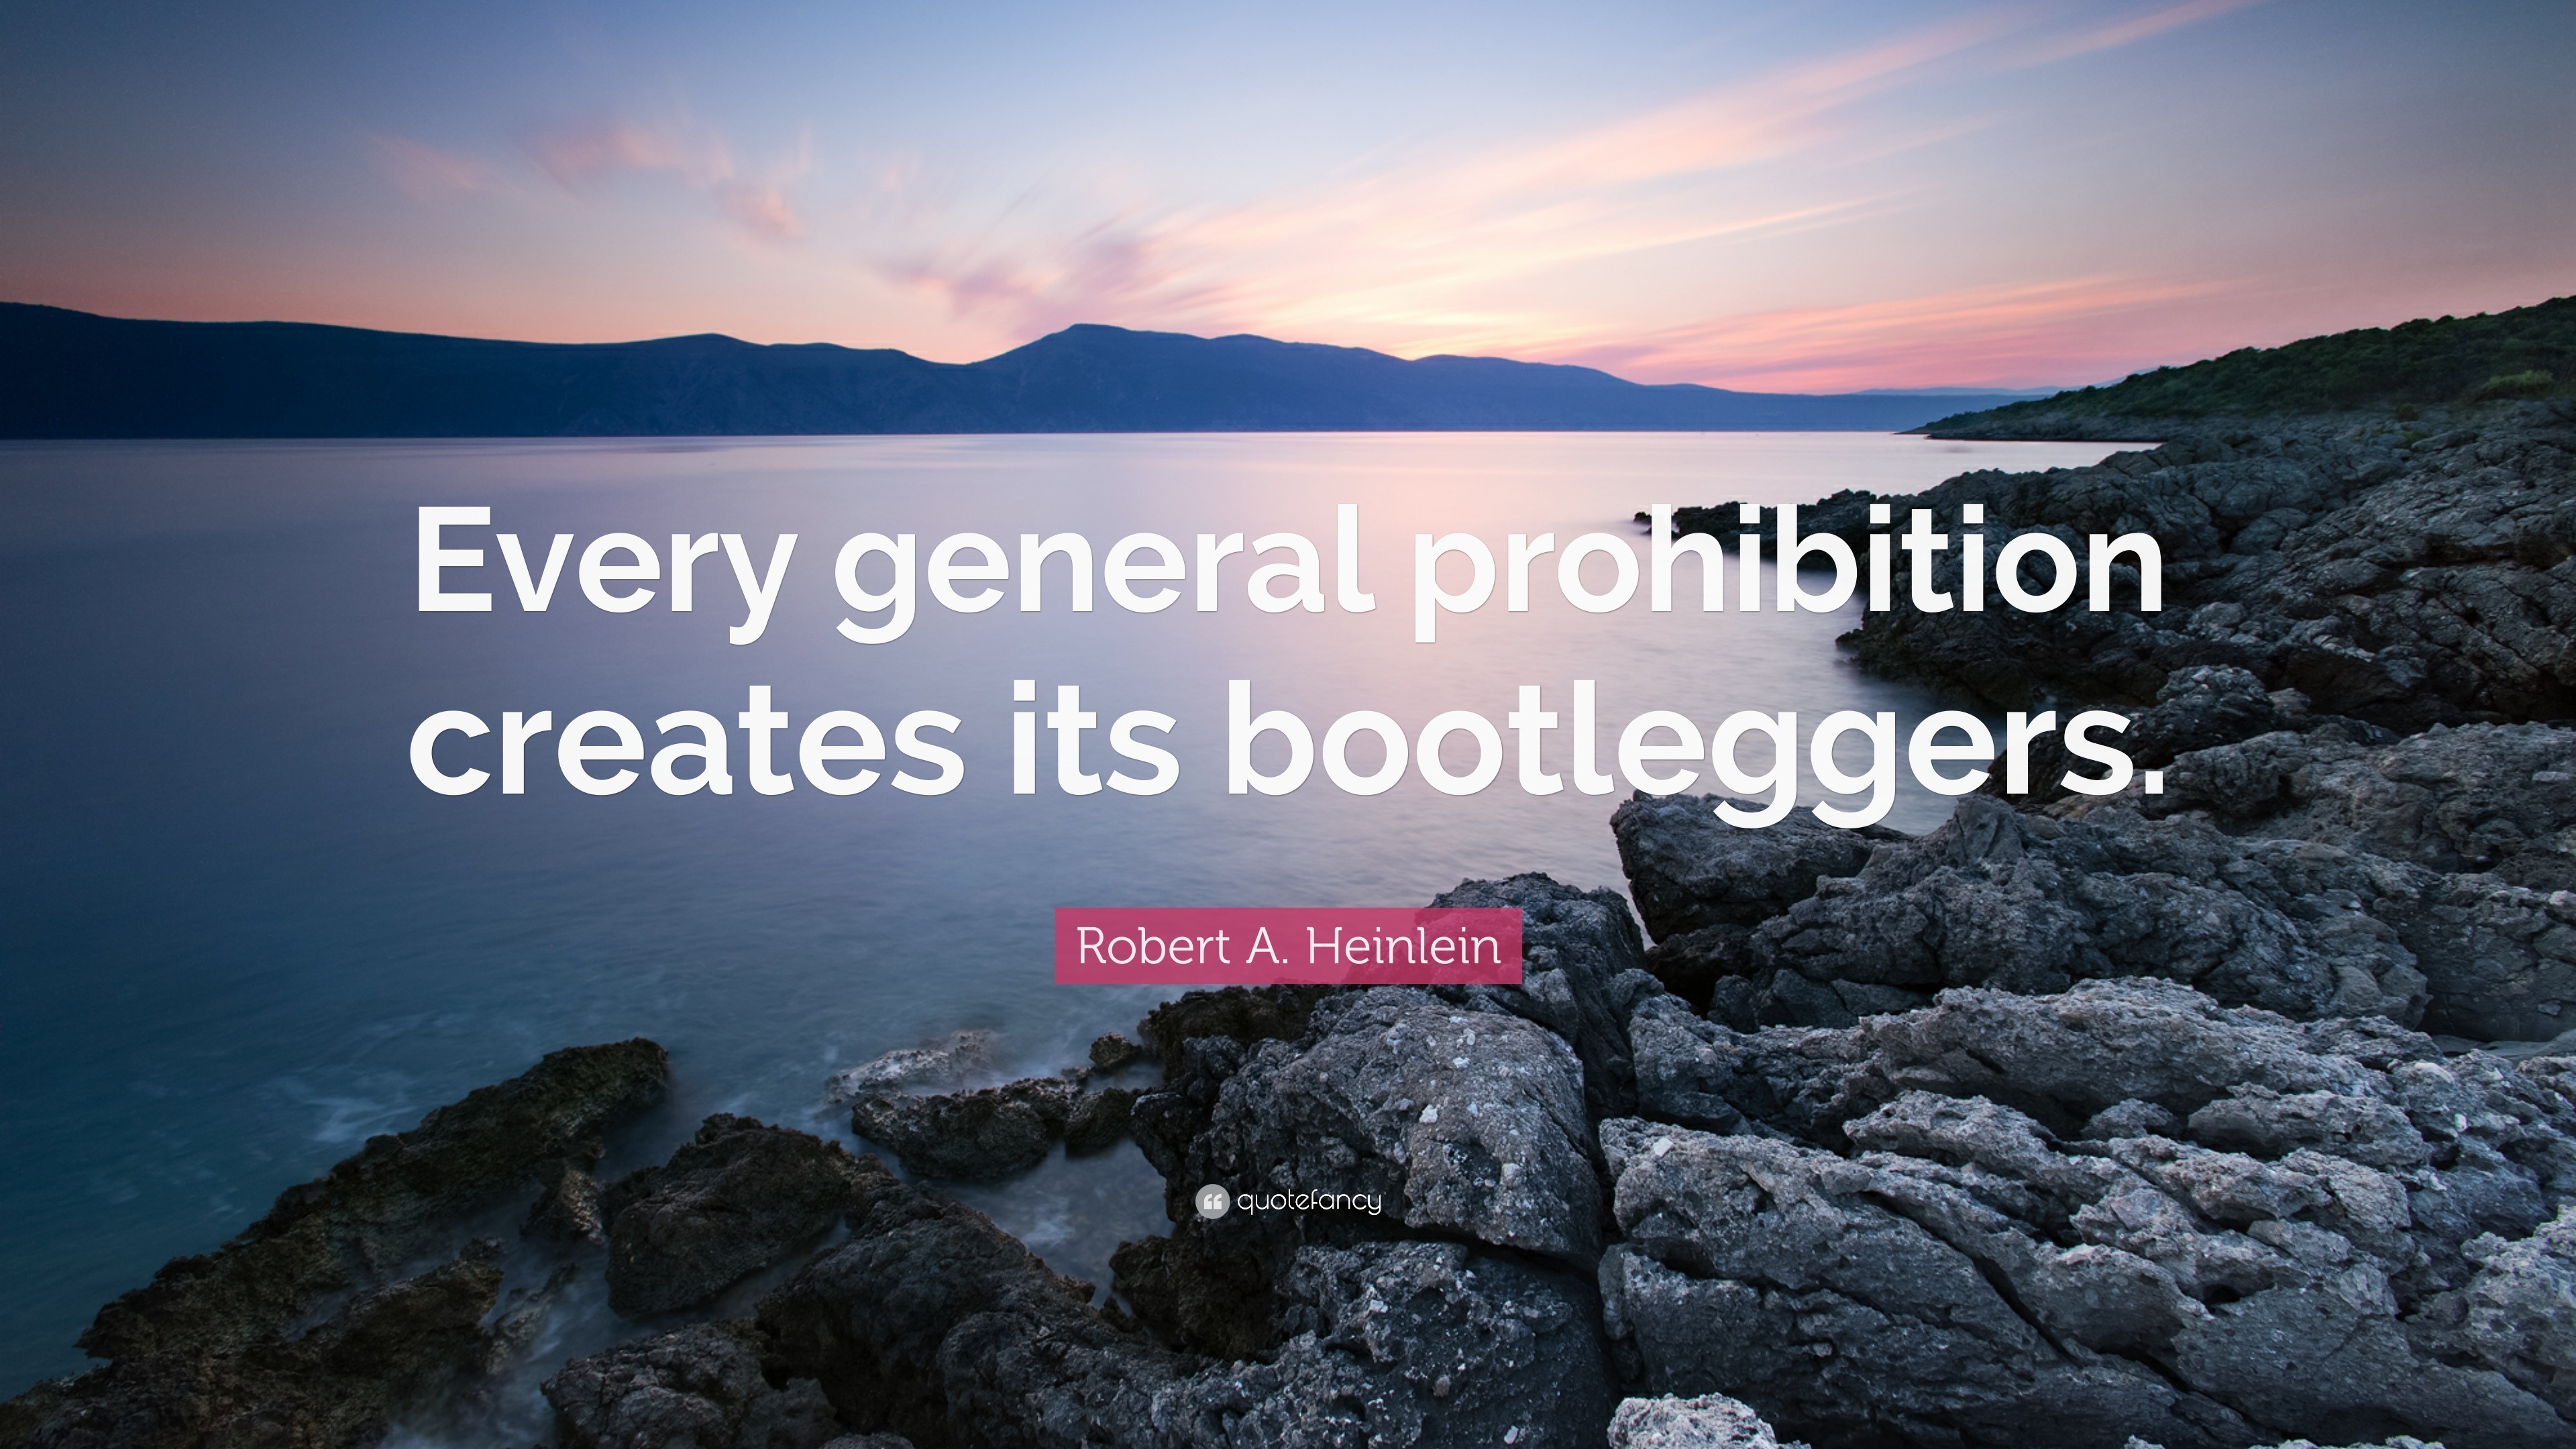 233296 Robert A Heinlein Quote Every general prohibition creates its